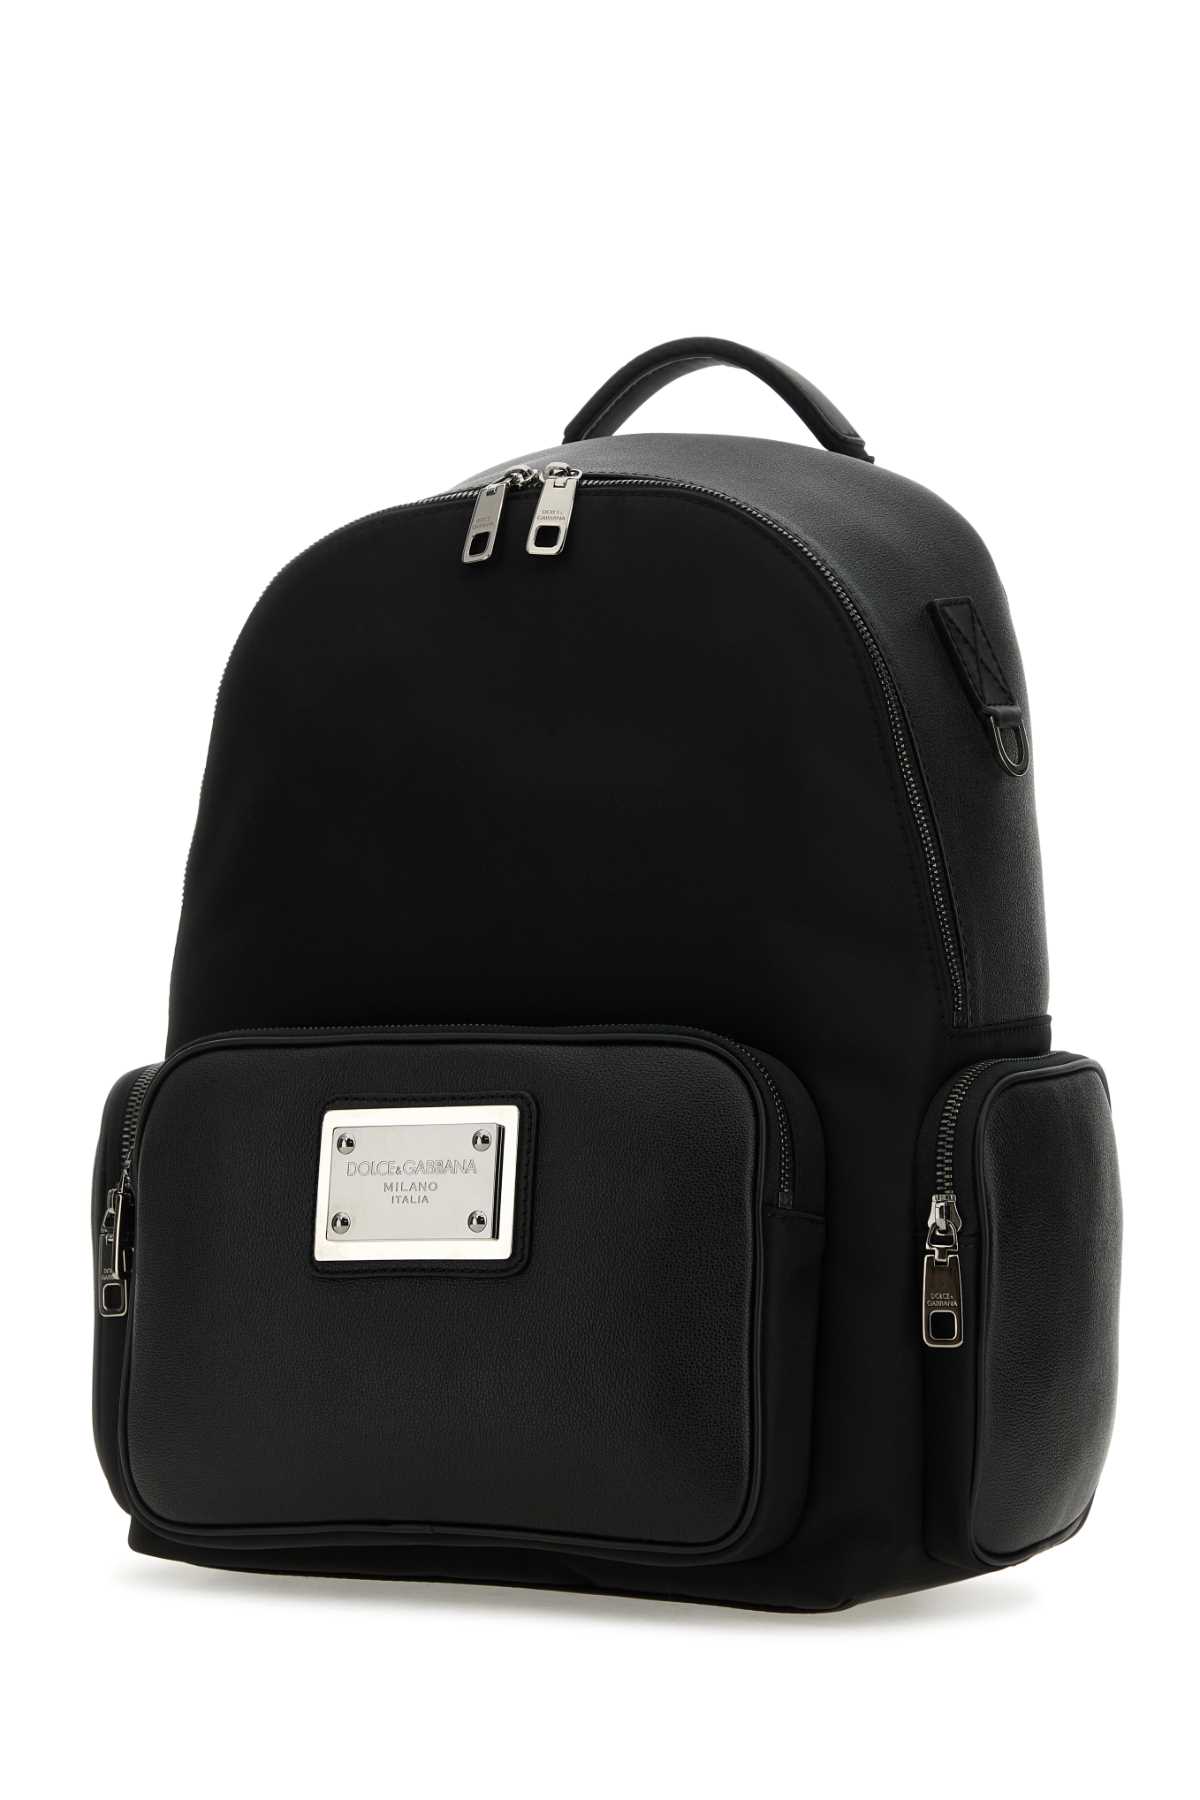 Dolce & Gabbana Black Fabric And Leather Backpack In 8b956